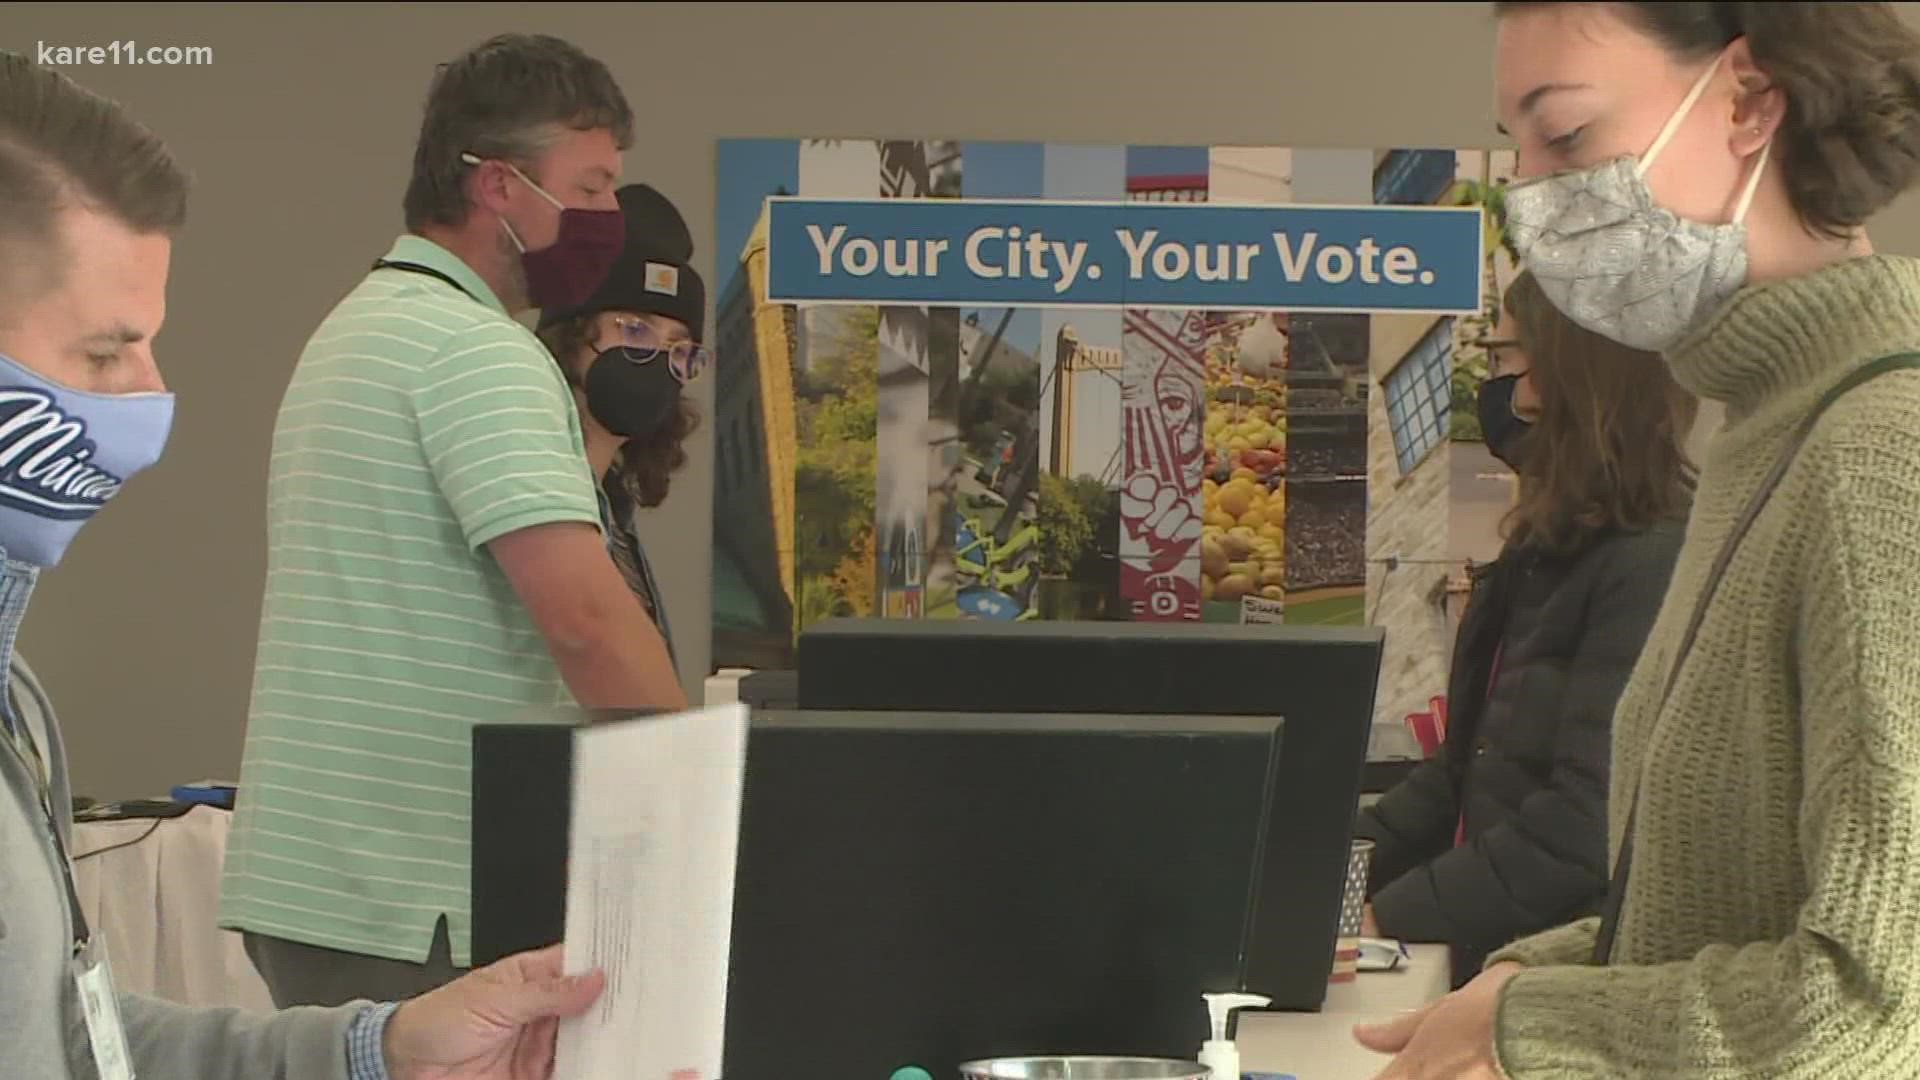 Minneapolis City Clerk Casey Carl says the city’s voter turnout is up over 140% from the last municipal election held in 2017.